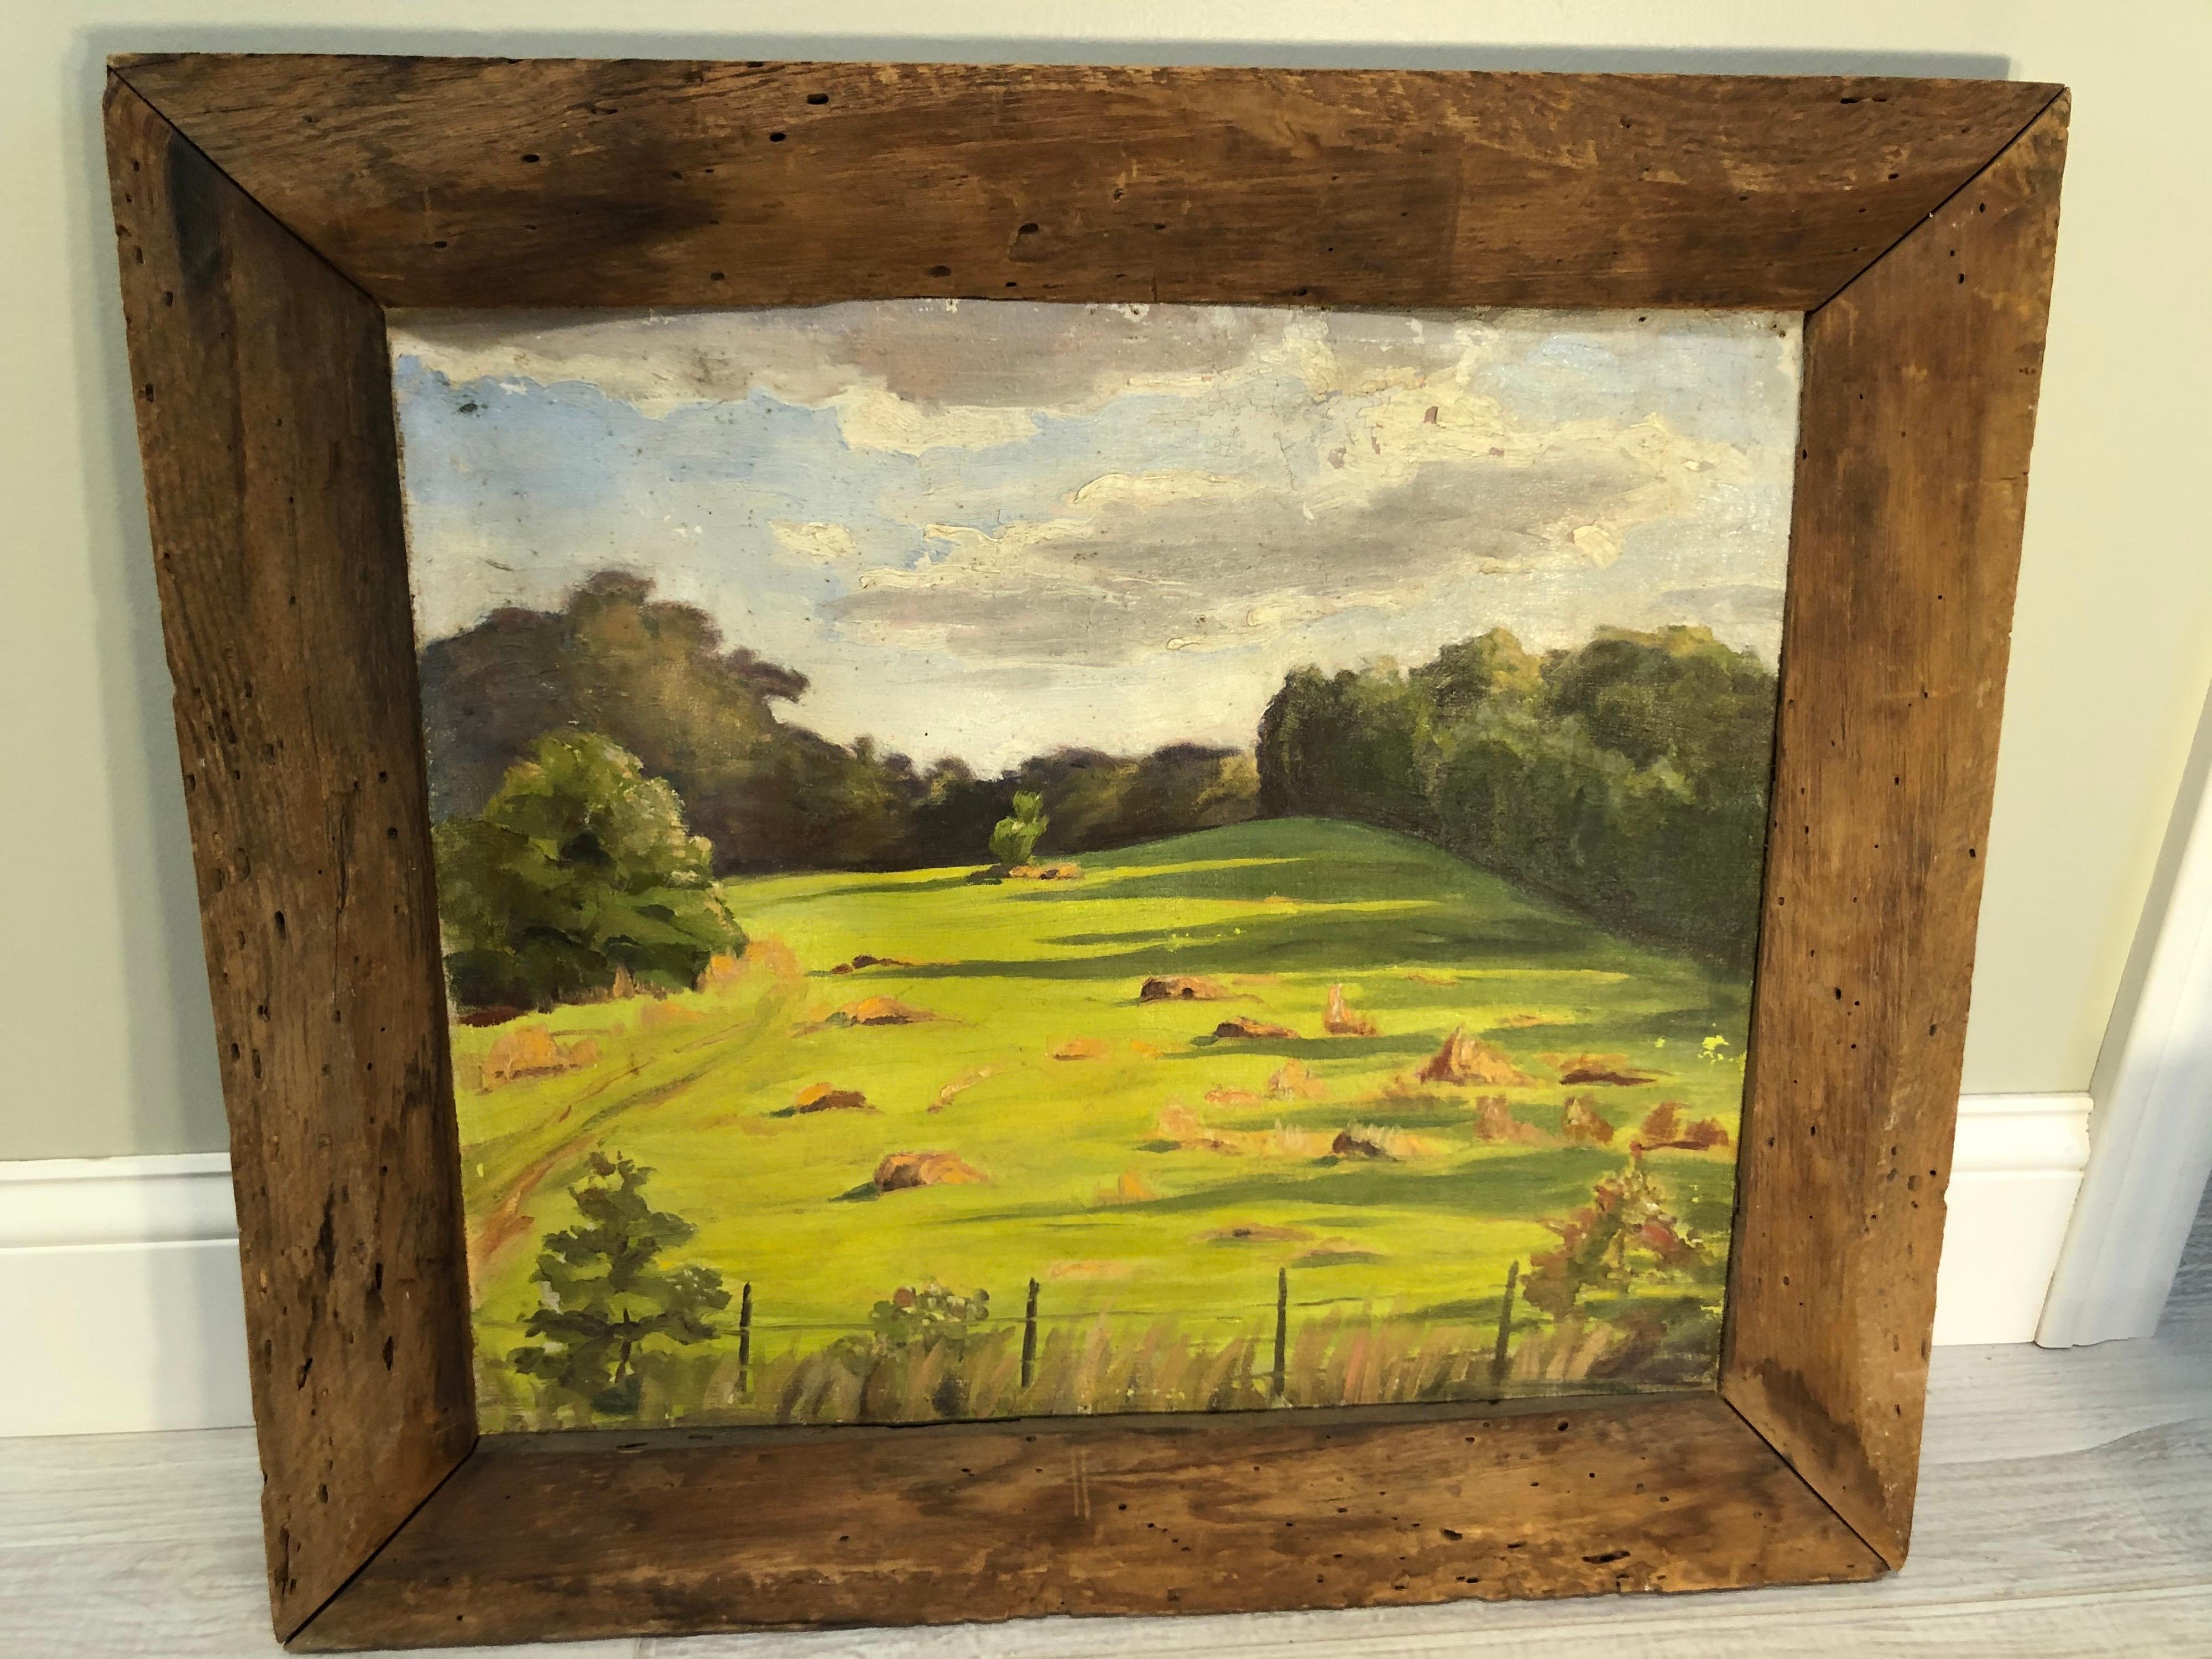 Bucolic Landscape in Primitive Barnwood frame. Nice square shape with a deep textural feel. The painting really draws you in . Floating clouds and green pastures make you want to fall asleep on the hay. this item can parcel ship for $49 domestically.